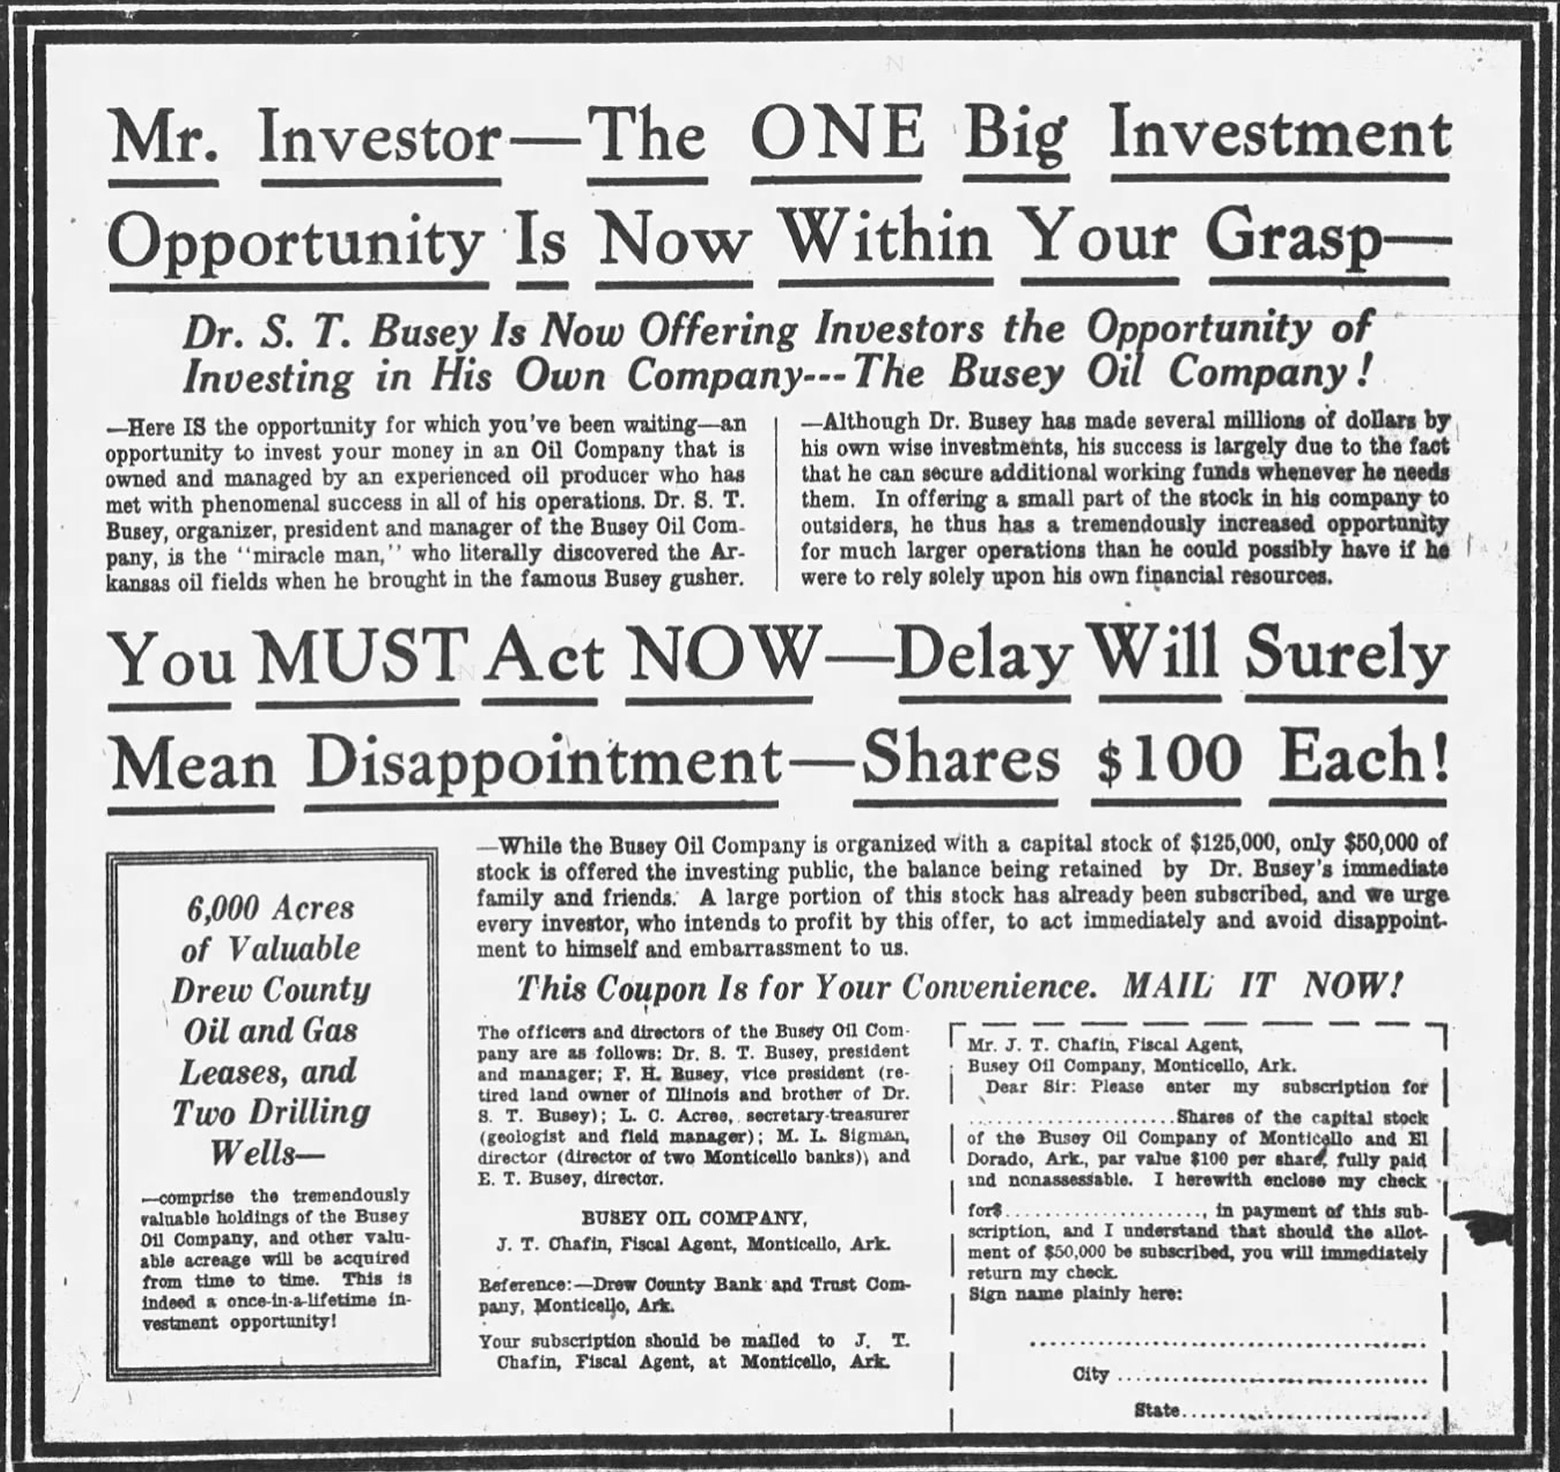 "Mister investor the one big investment opportunity is now within your grasp" newspaper clipping